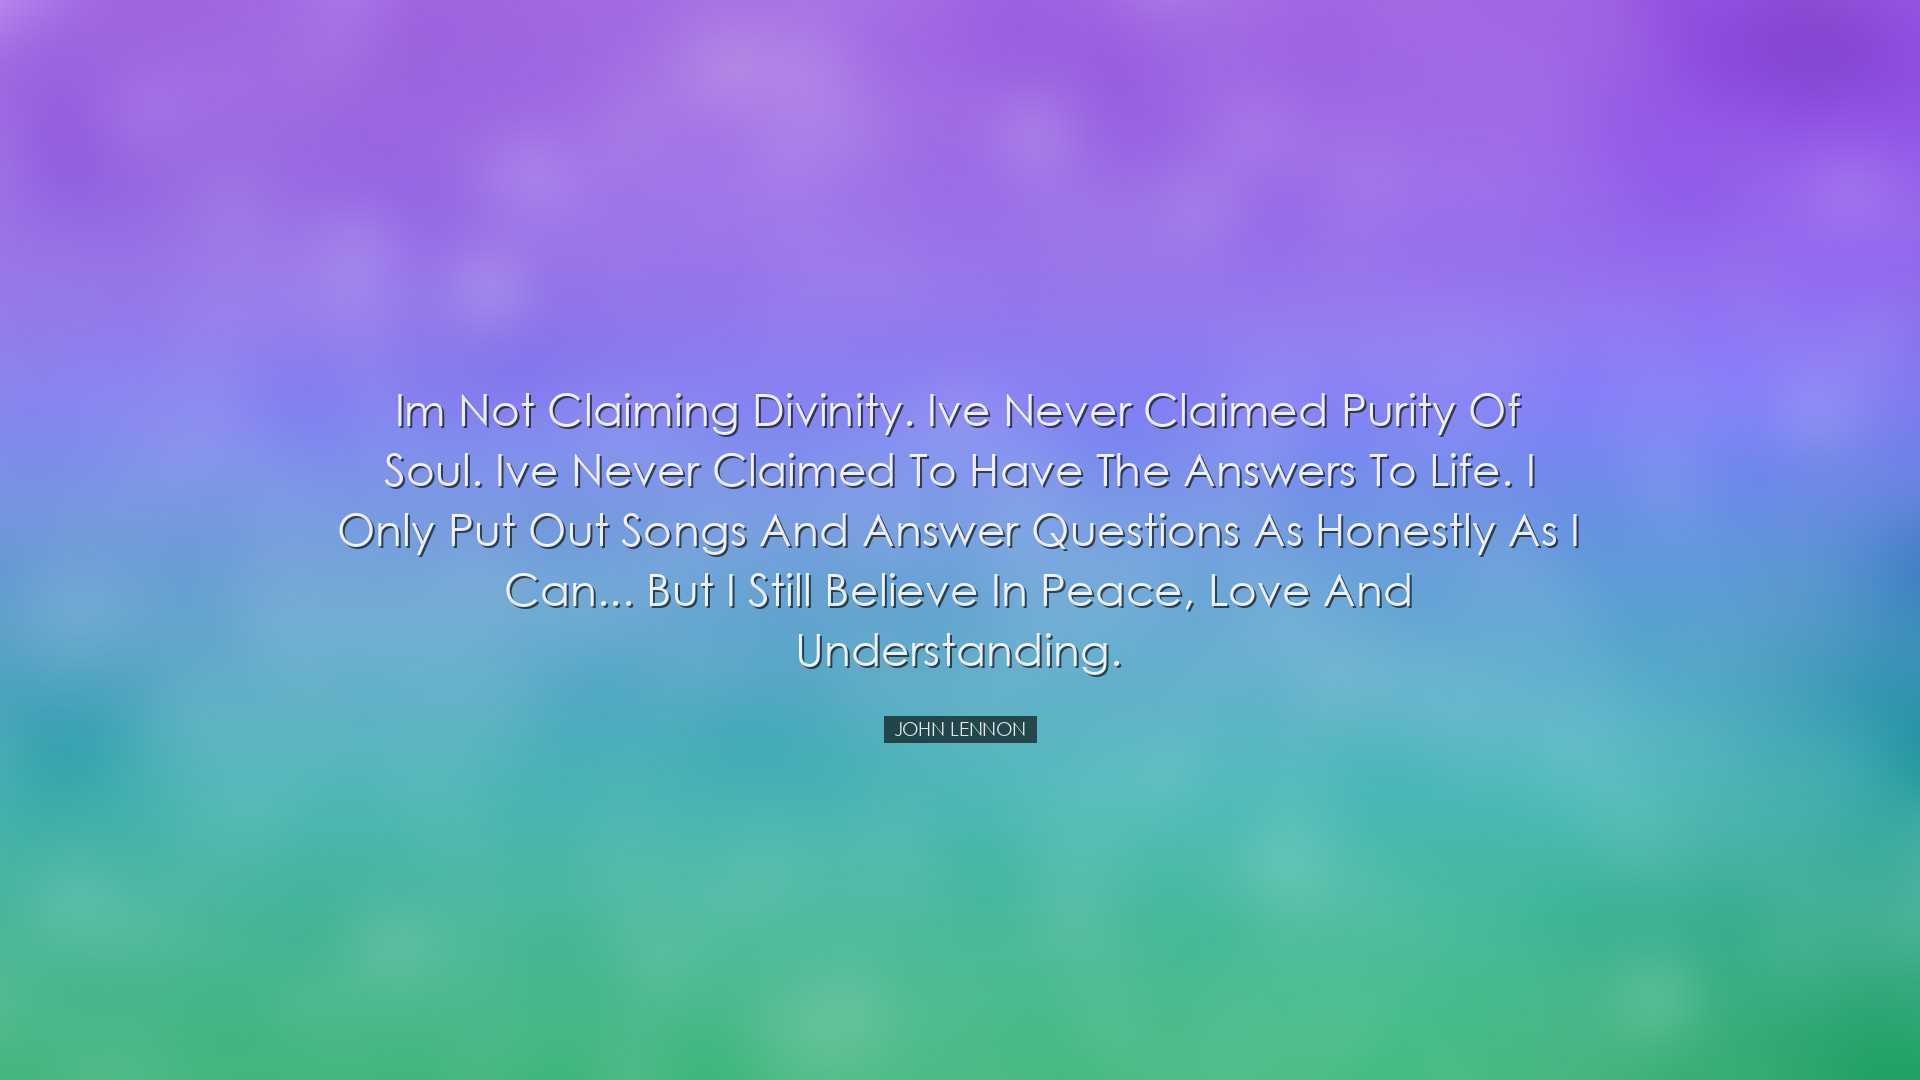 Im not claiming divinity. Ive never claimed purity of soul. Ive ne